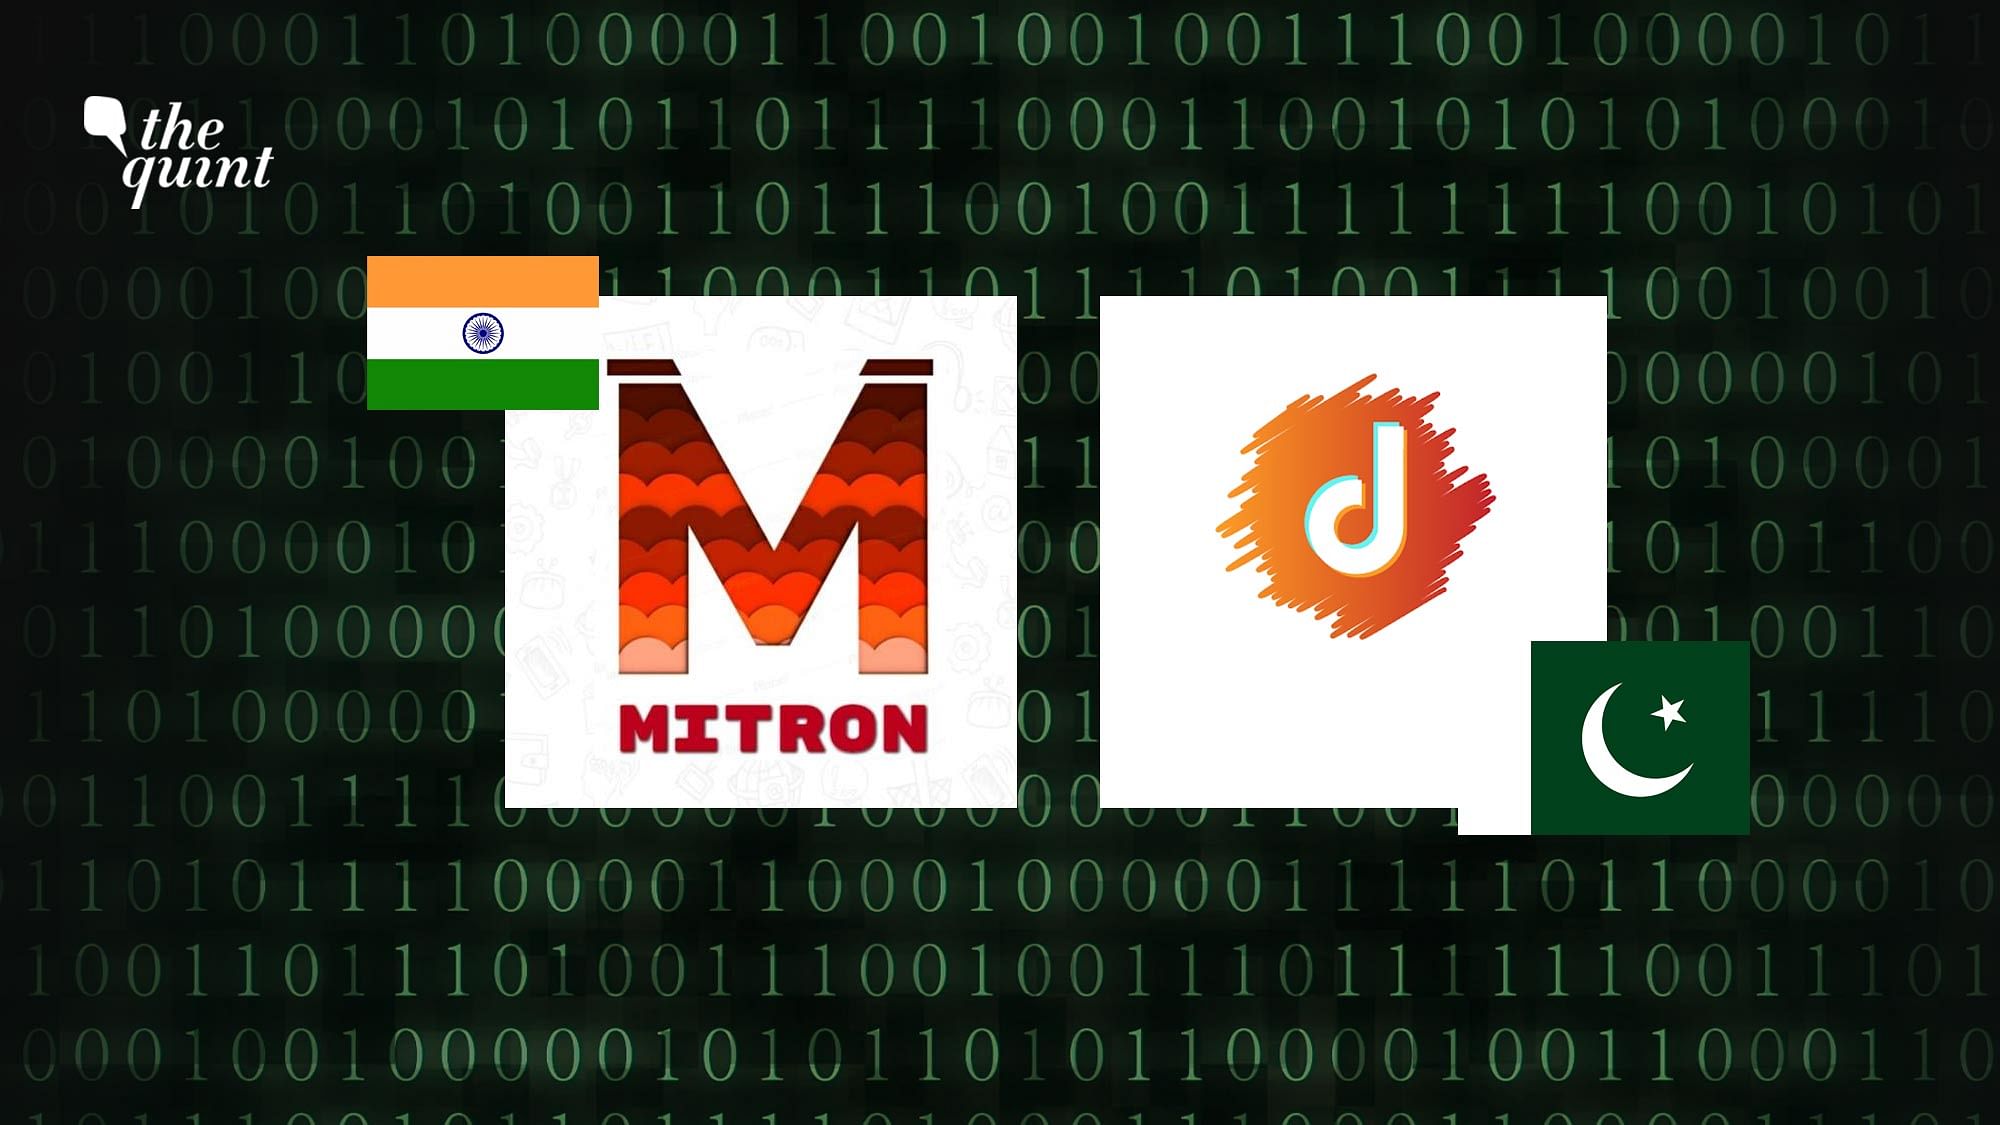 It has now emerged that Shivank Agarwal has not developed the Mitron himself but has purchased TicTic’s source code.